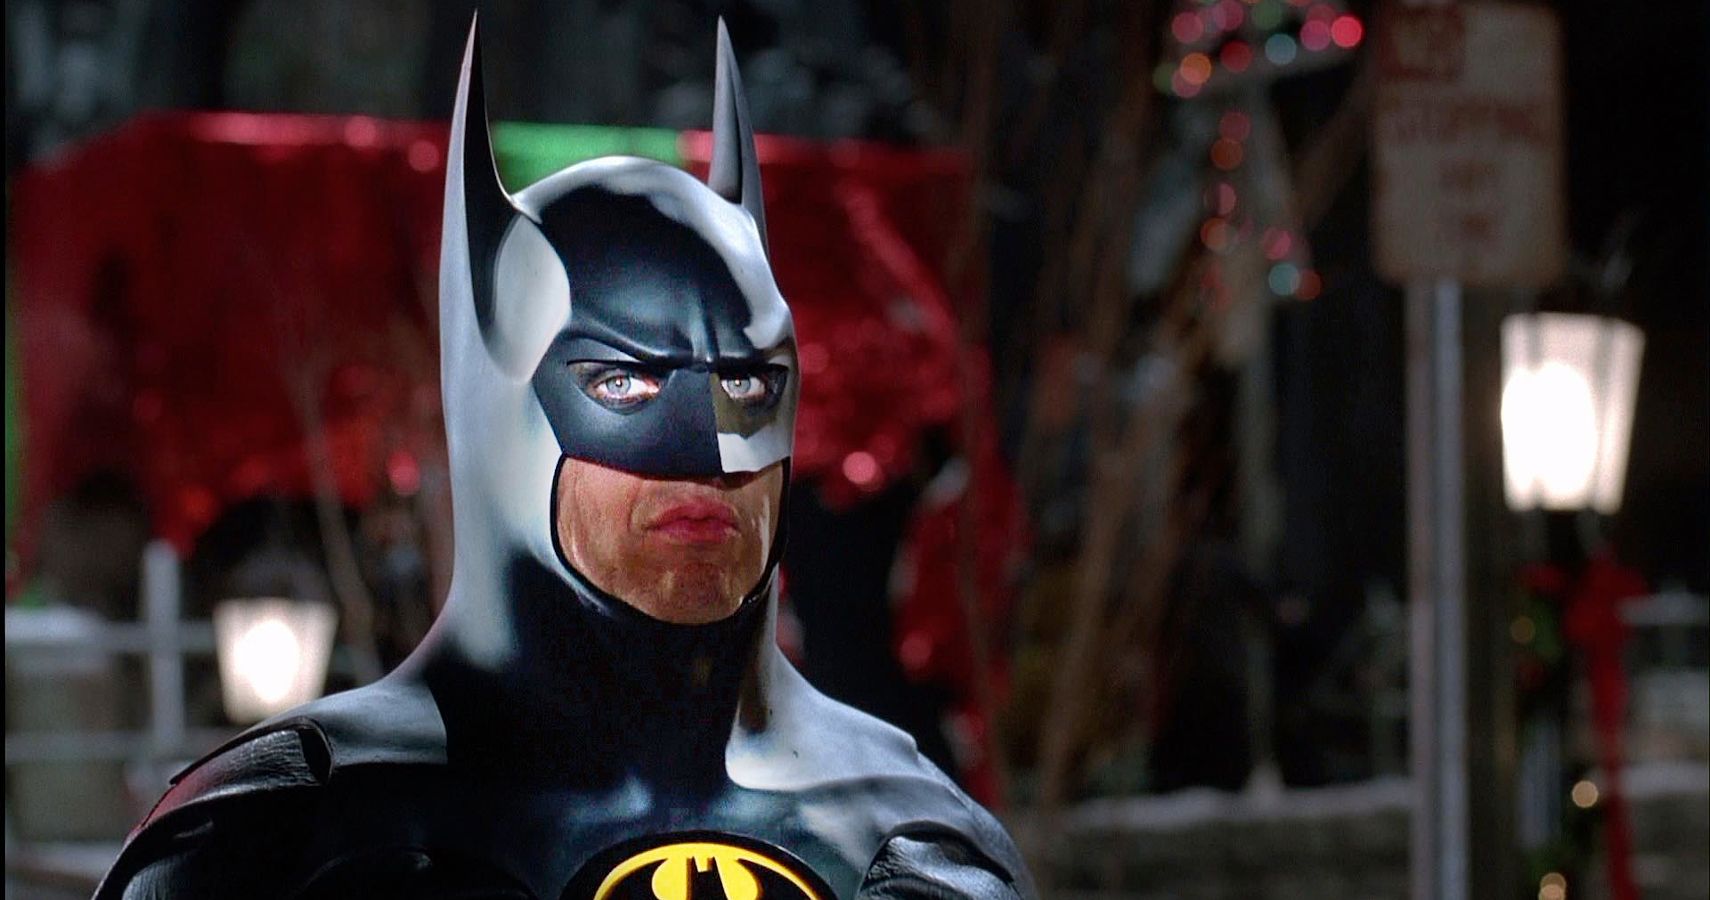 Behind The Scenes Facts About Michael Keaton's Batman